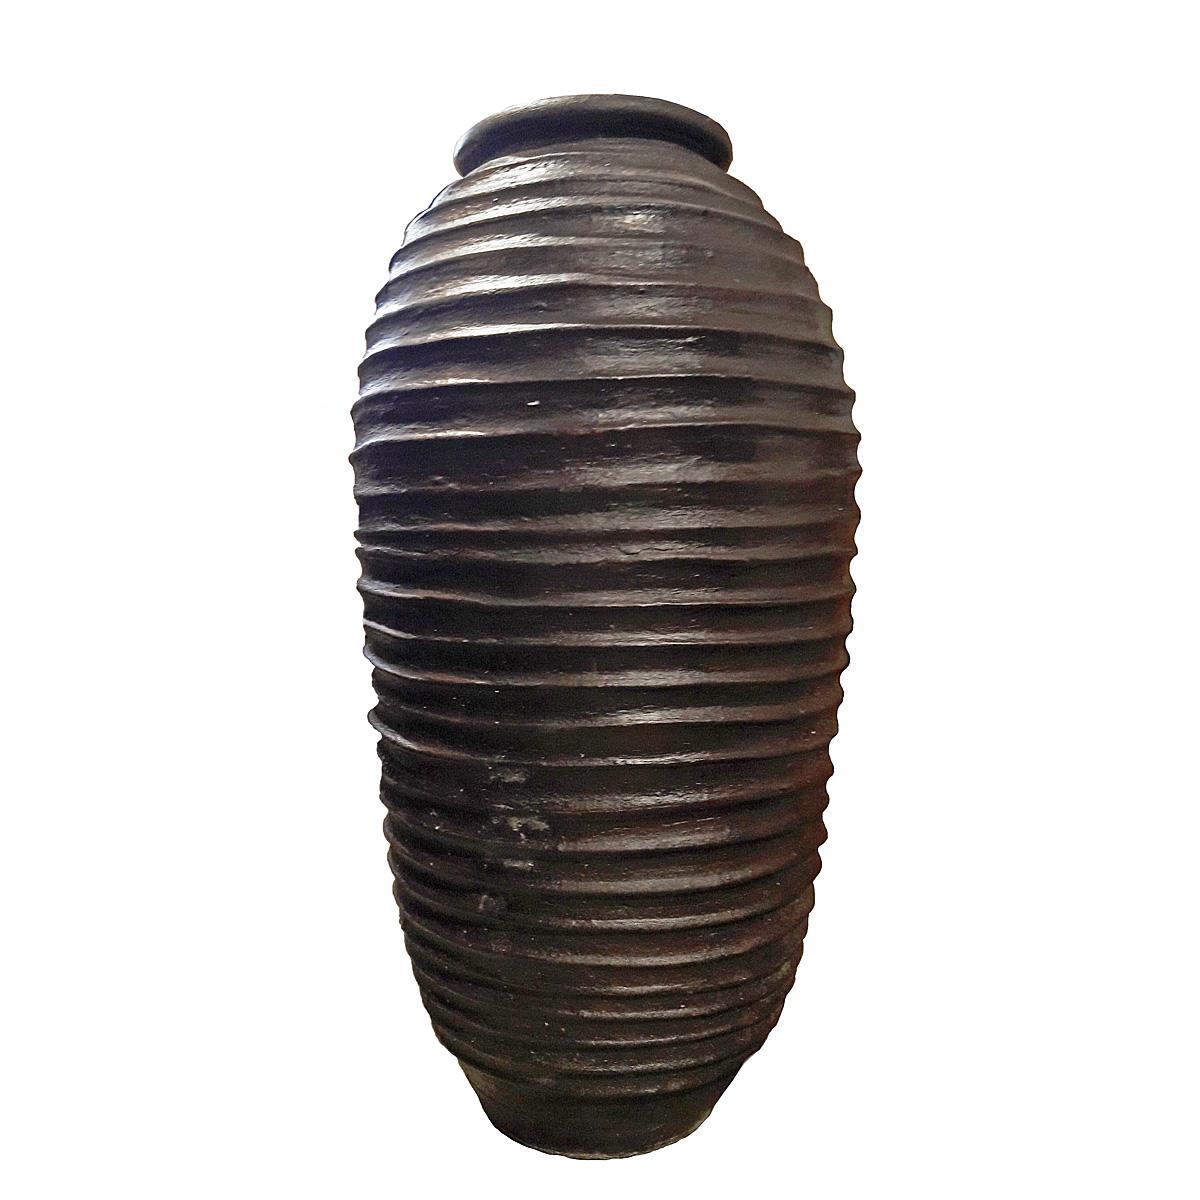 Contemporary Tall Clay Jar from Indonesia